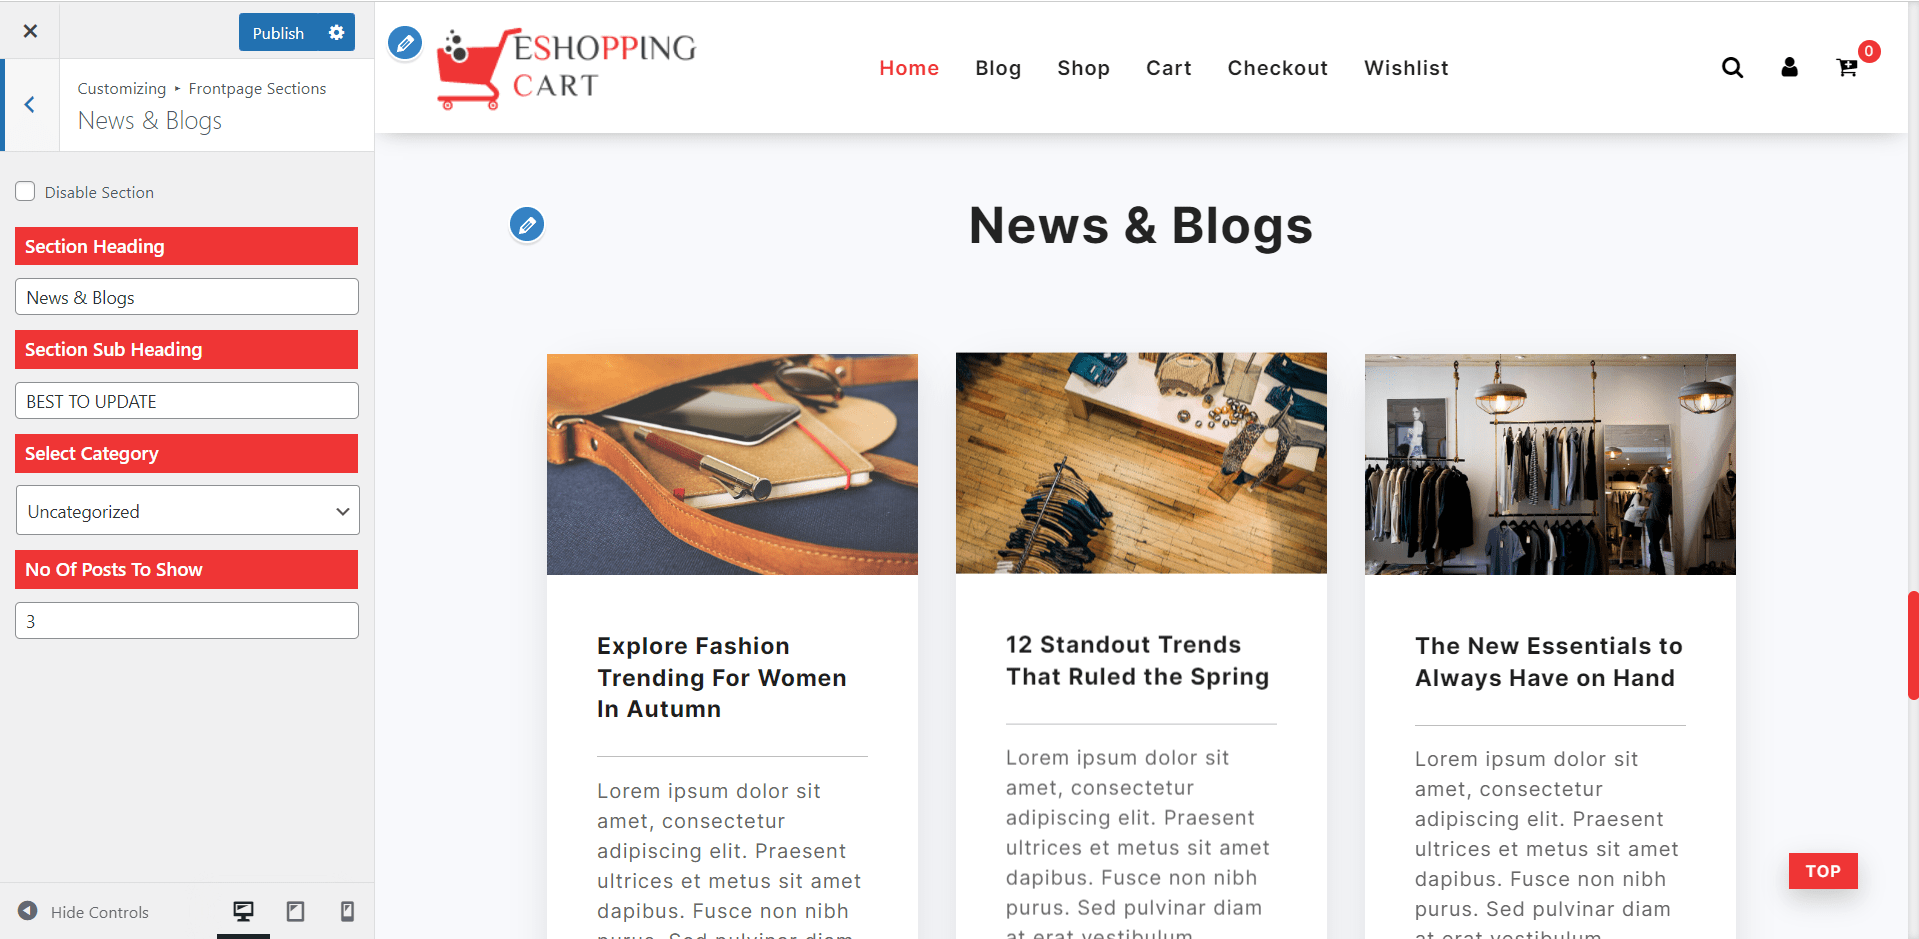 News & Blogs Section